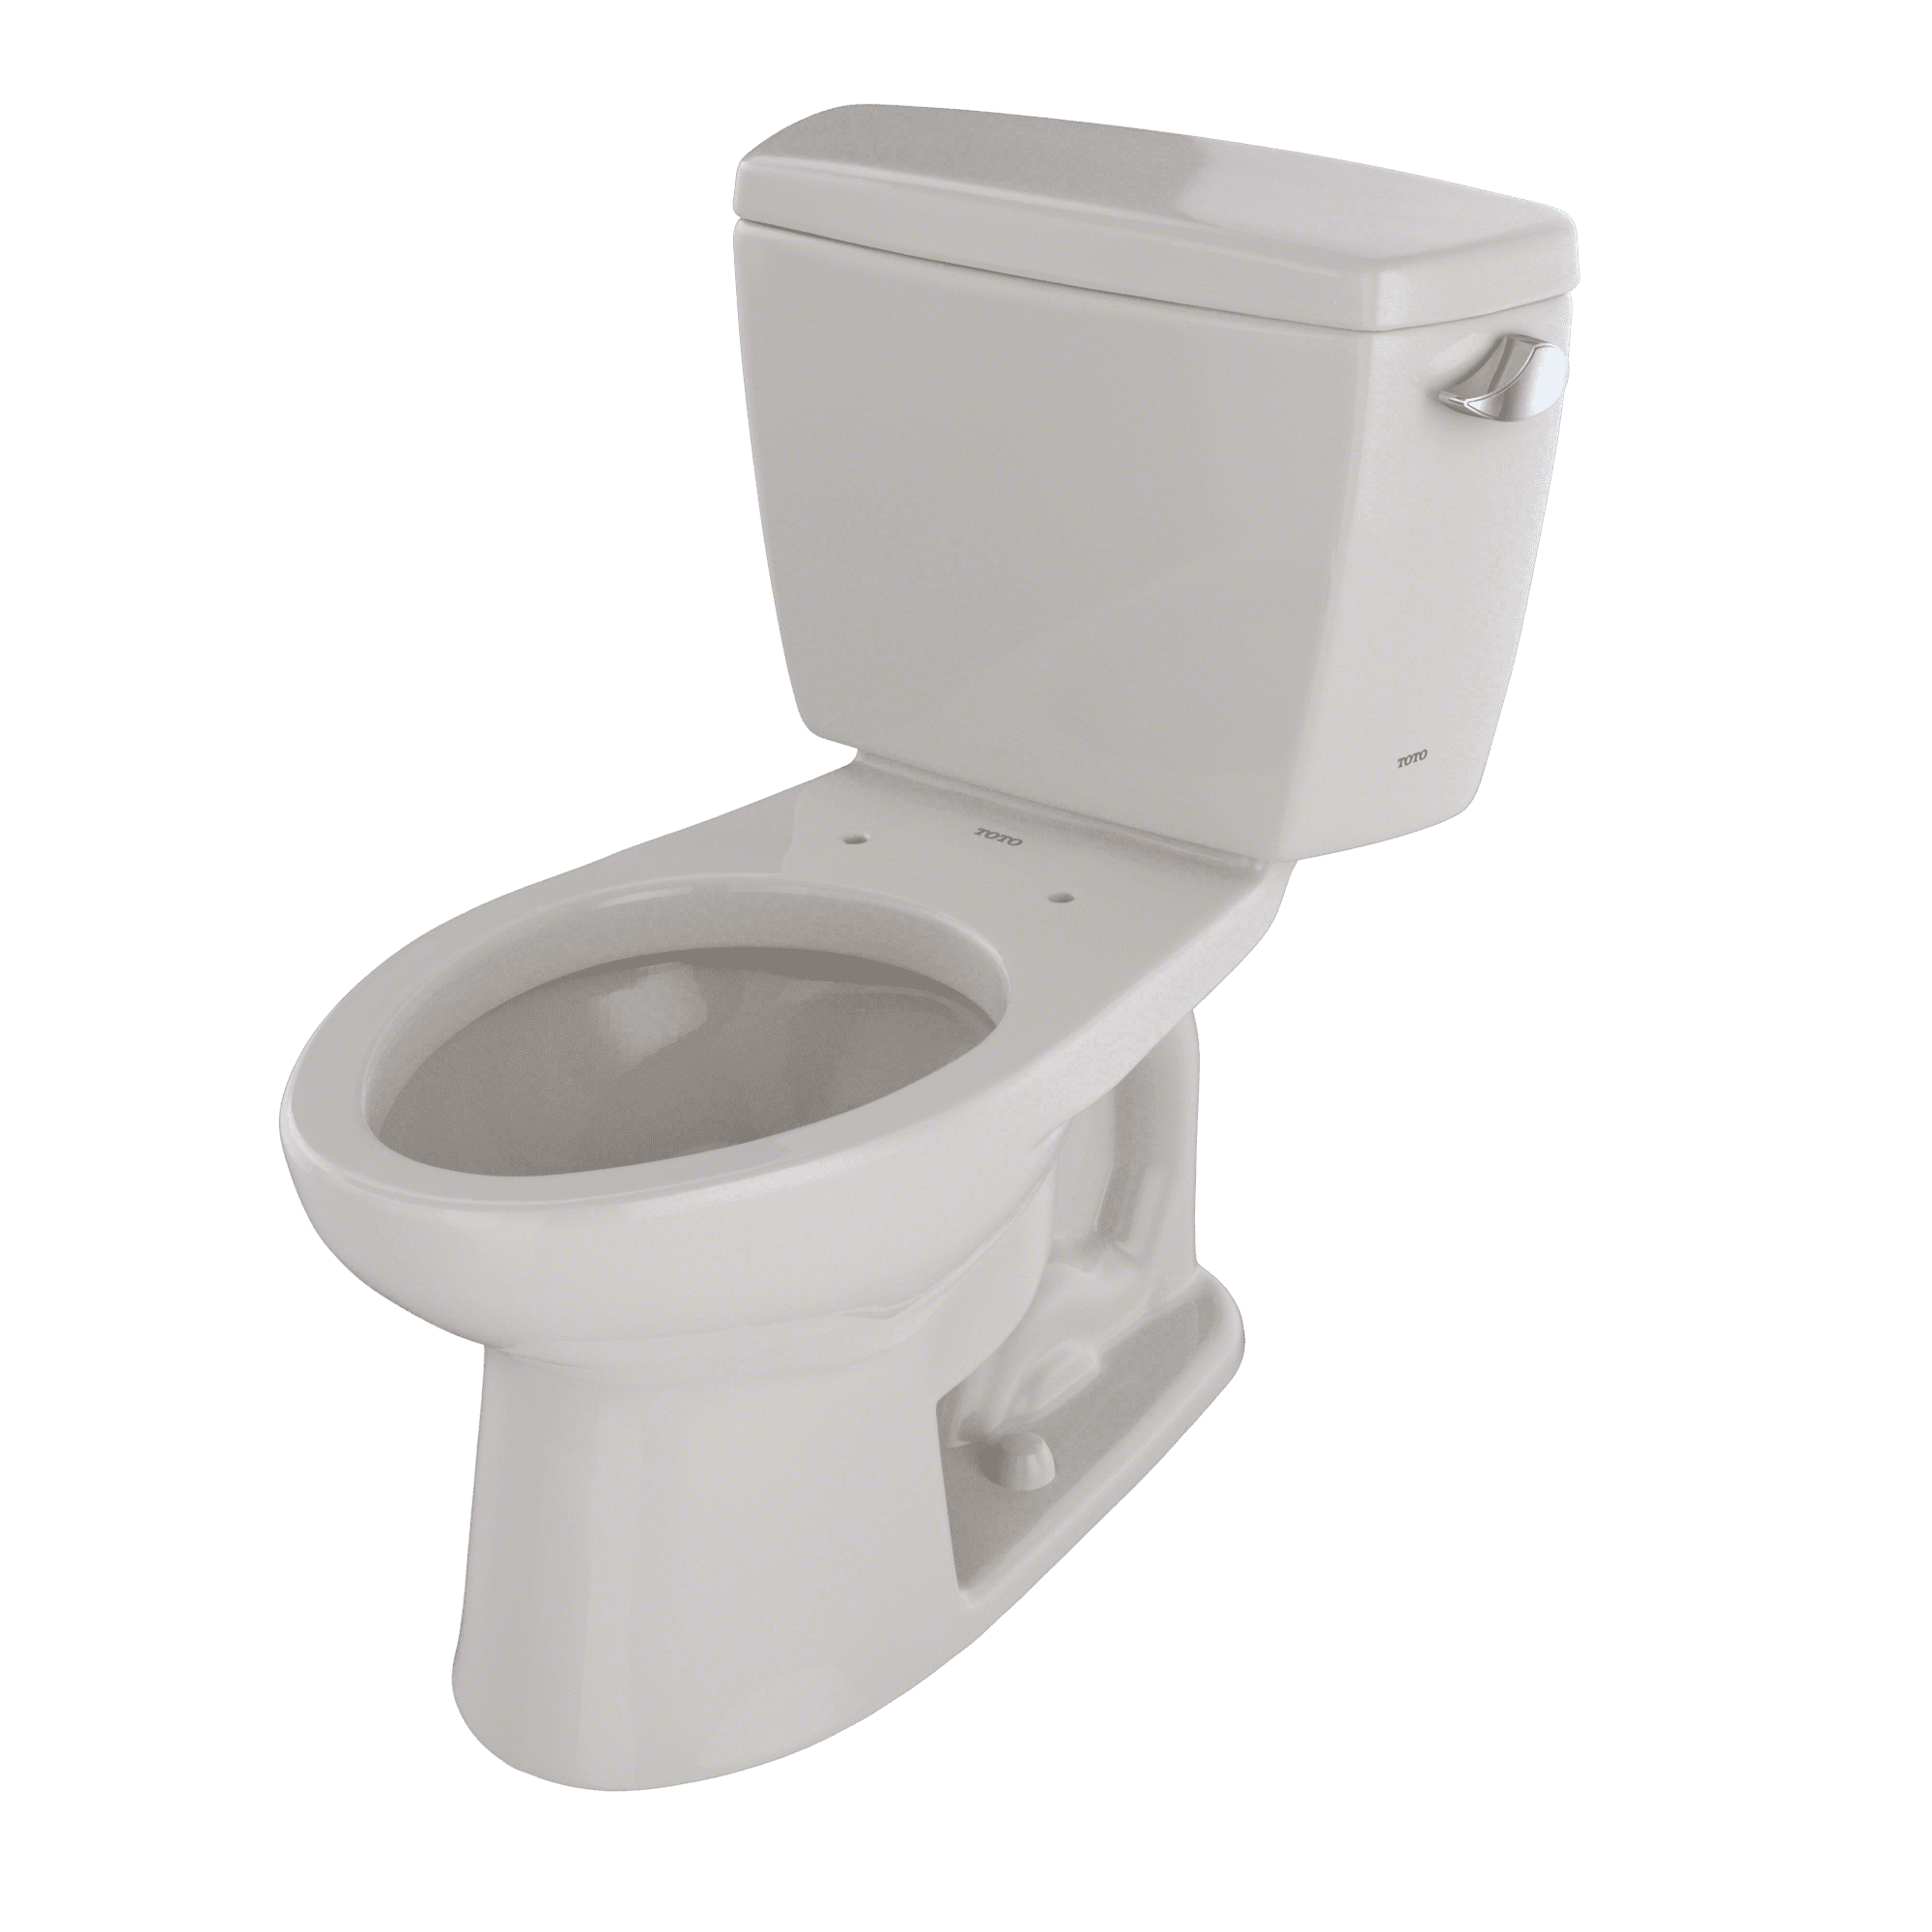 Two-piece Toilet Two-Piece Toilet Elongated Bowl and Water Tank with Soft Closing Seat Cotton White Finish Dualable for Left and Right Hand Flush Valve